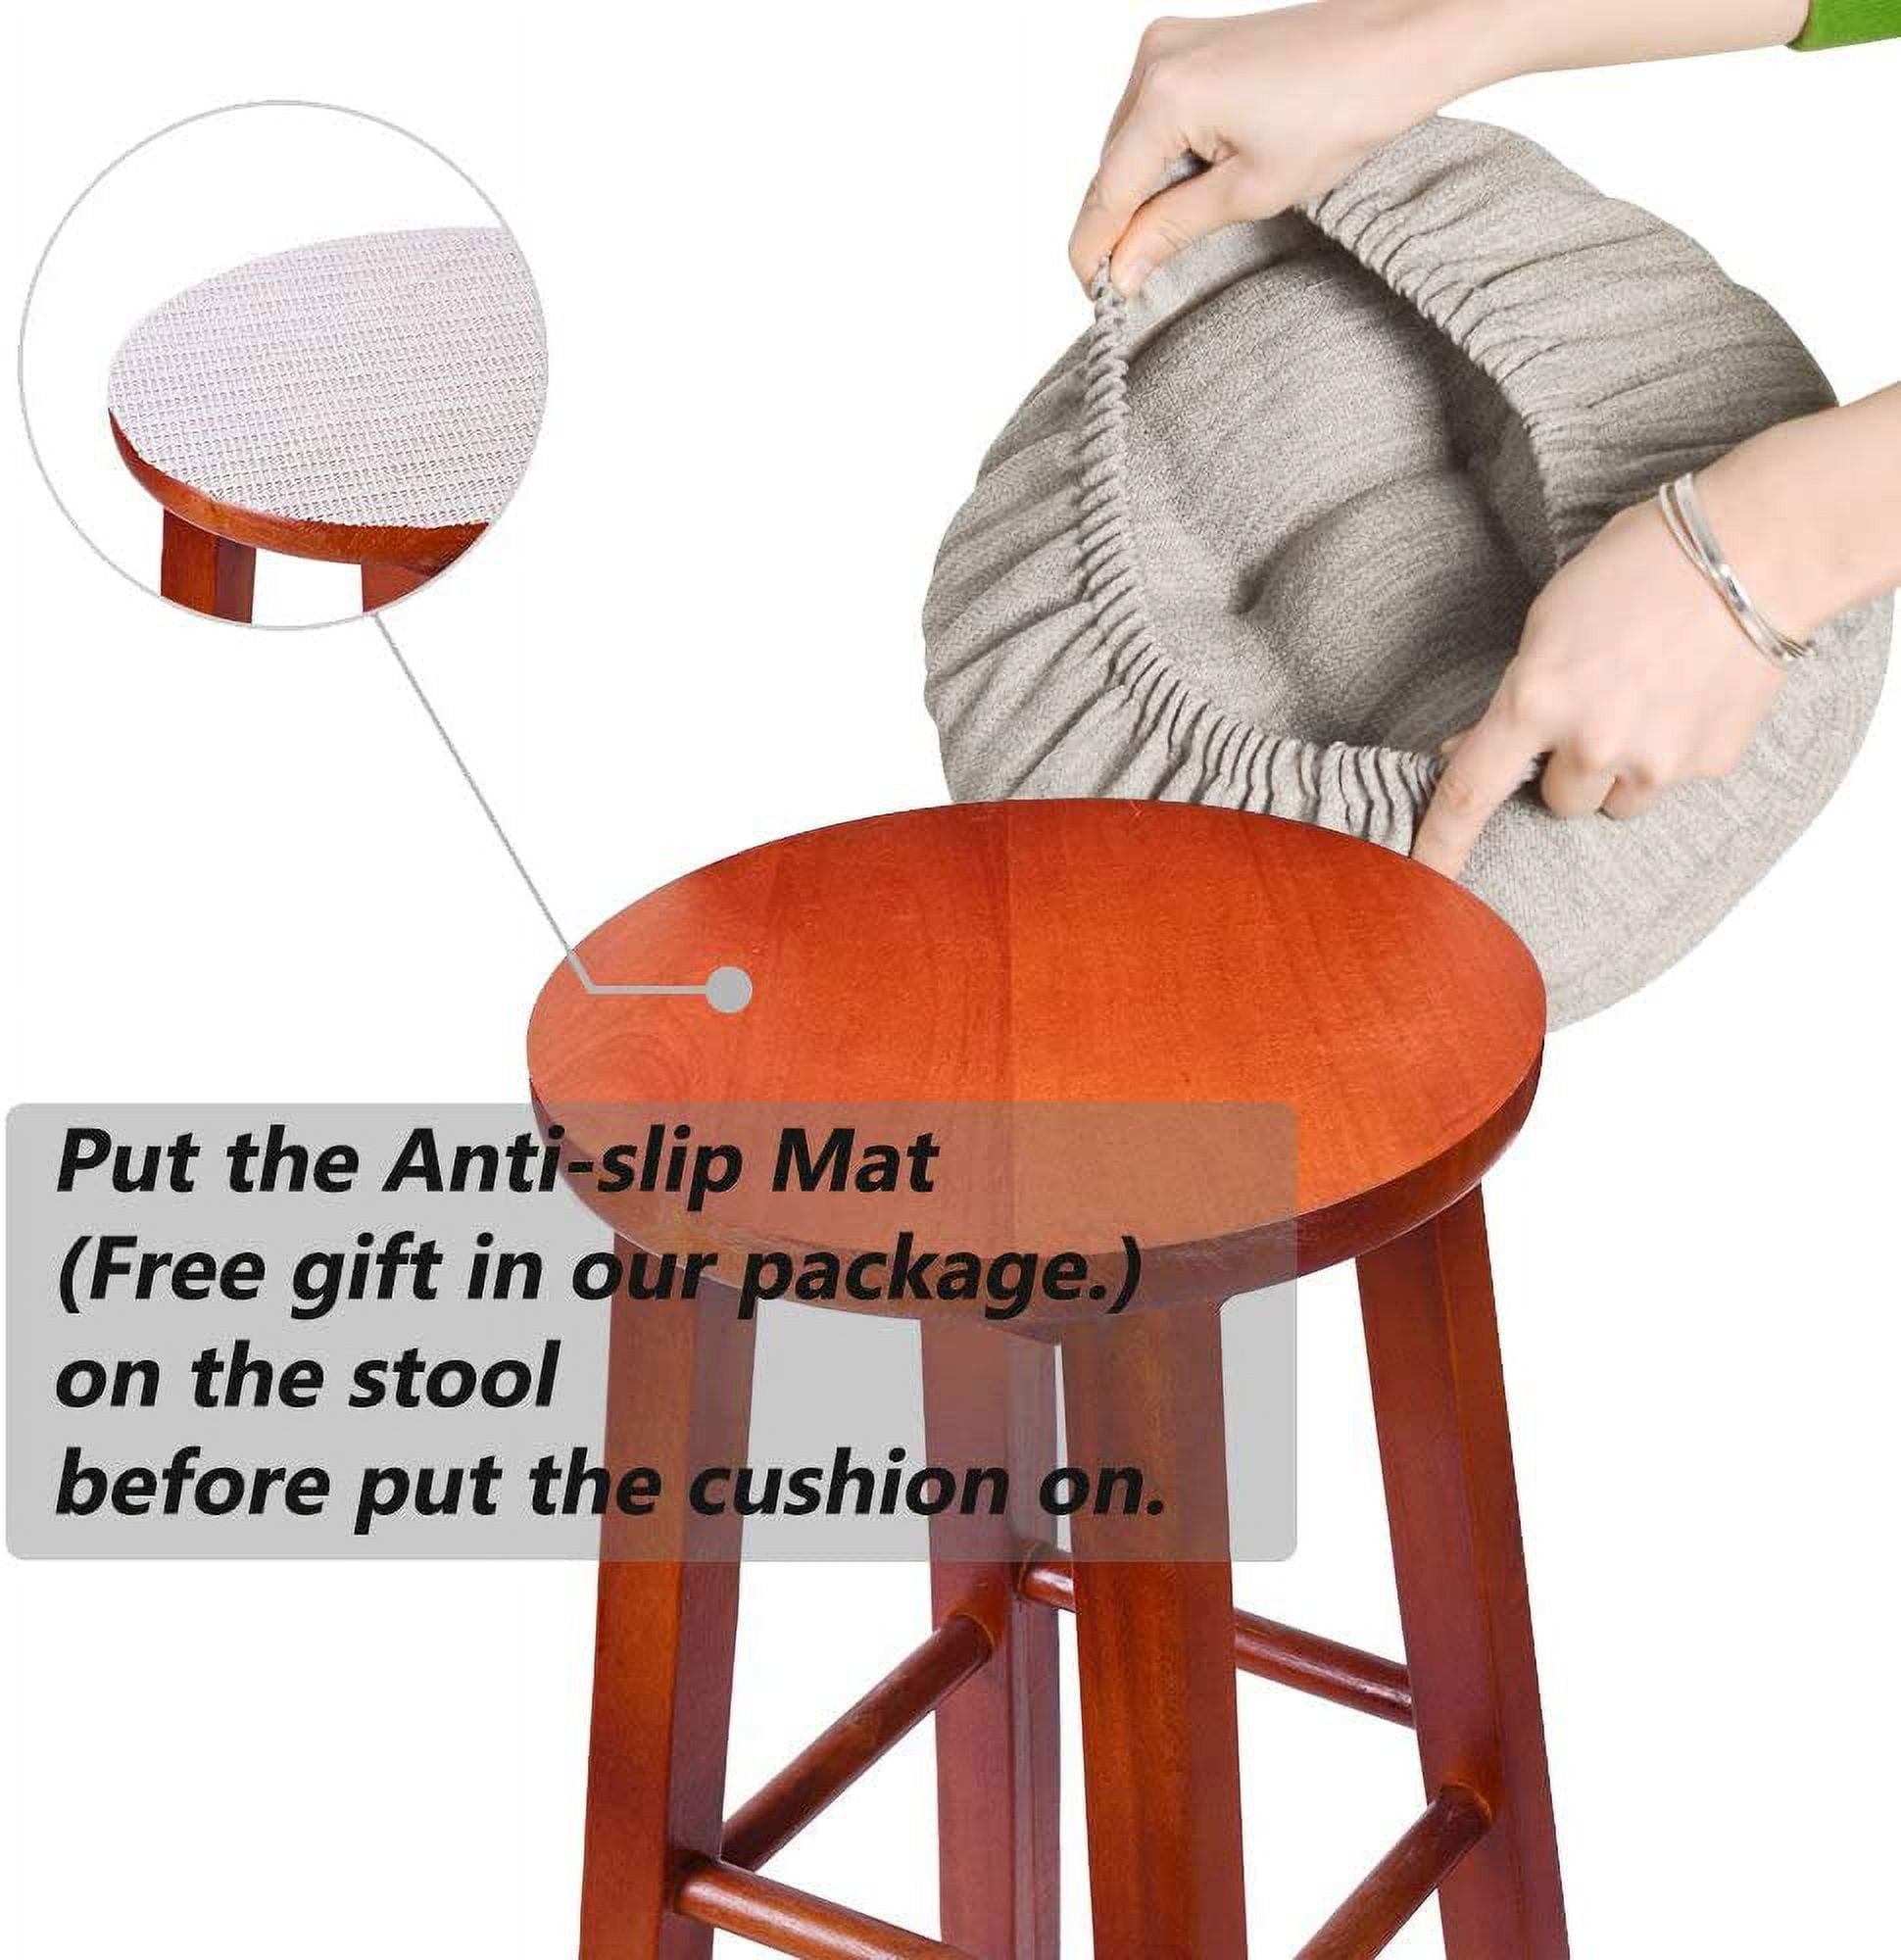 NVEOP Round Bar Stool Cushion with 4 Ties 12 inch, Comfortable Sitting for Round Wooden or Metal Stools, Make Your Old Stool New(Stool Cushion Only